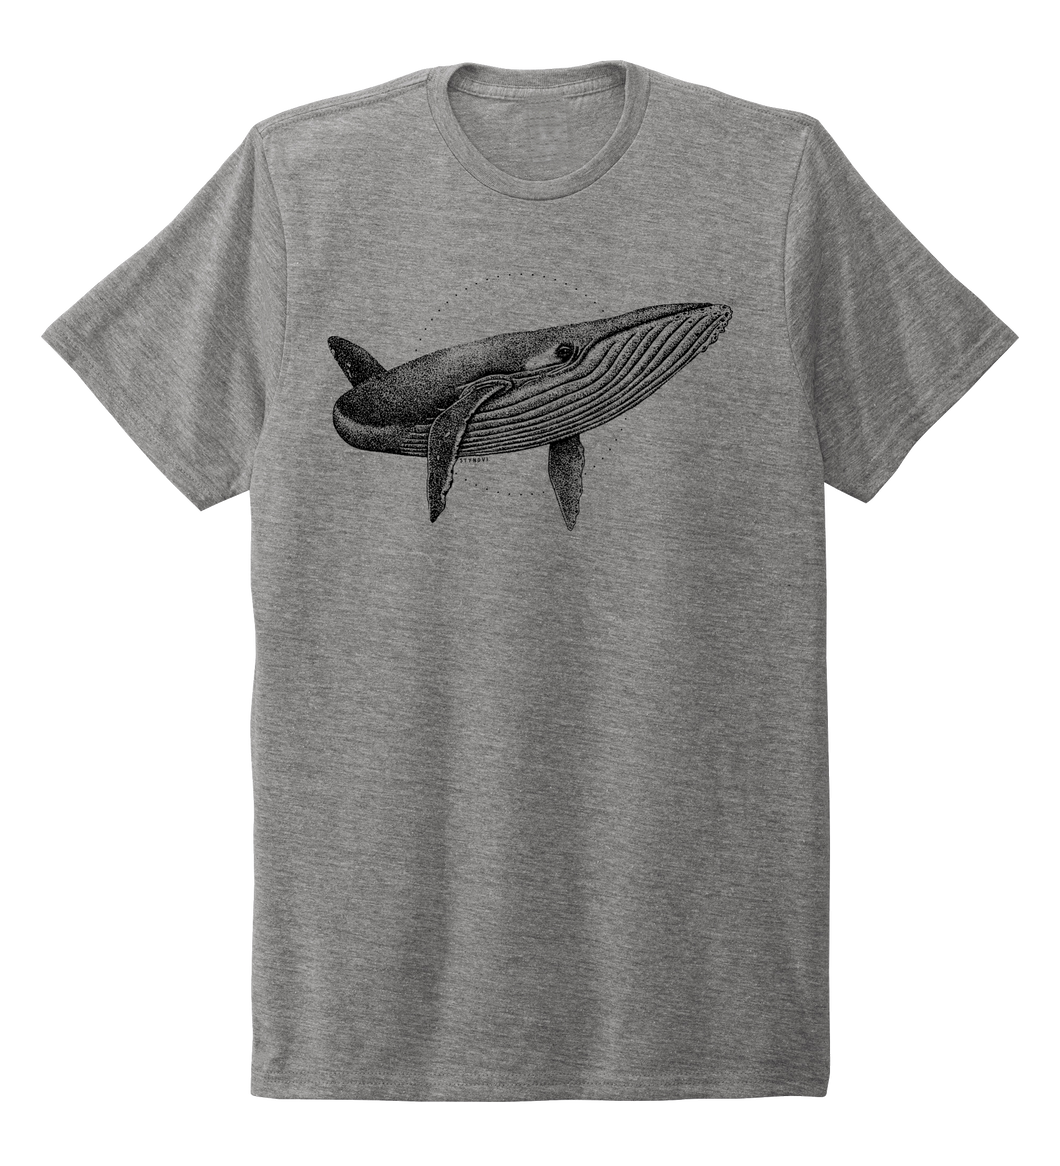 STYNGVI, Humpback Whale, Unisex Crew Neck T-shirt in Oyster Grey